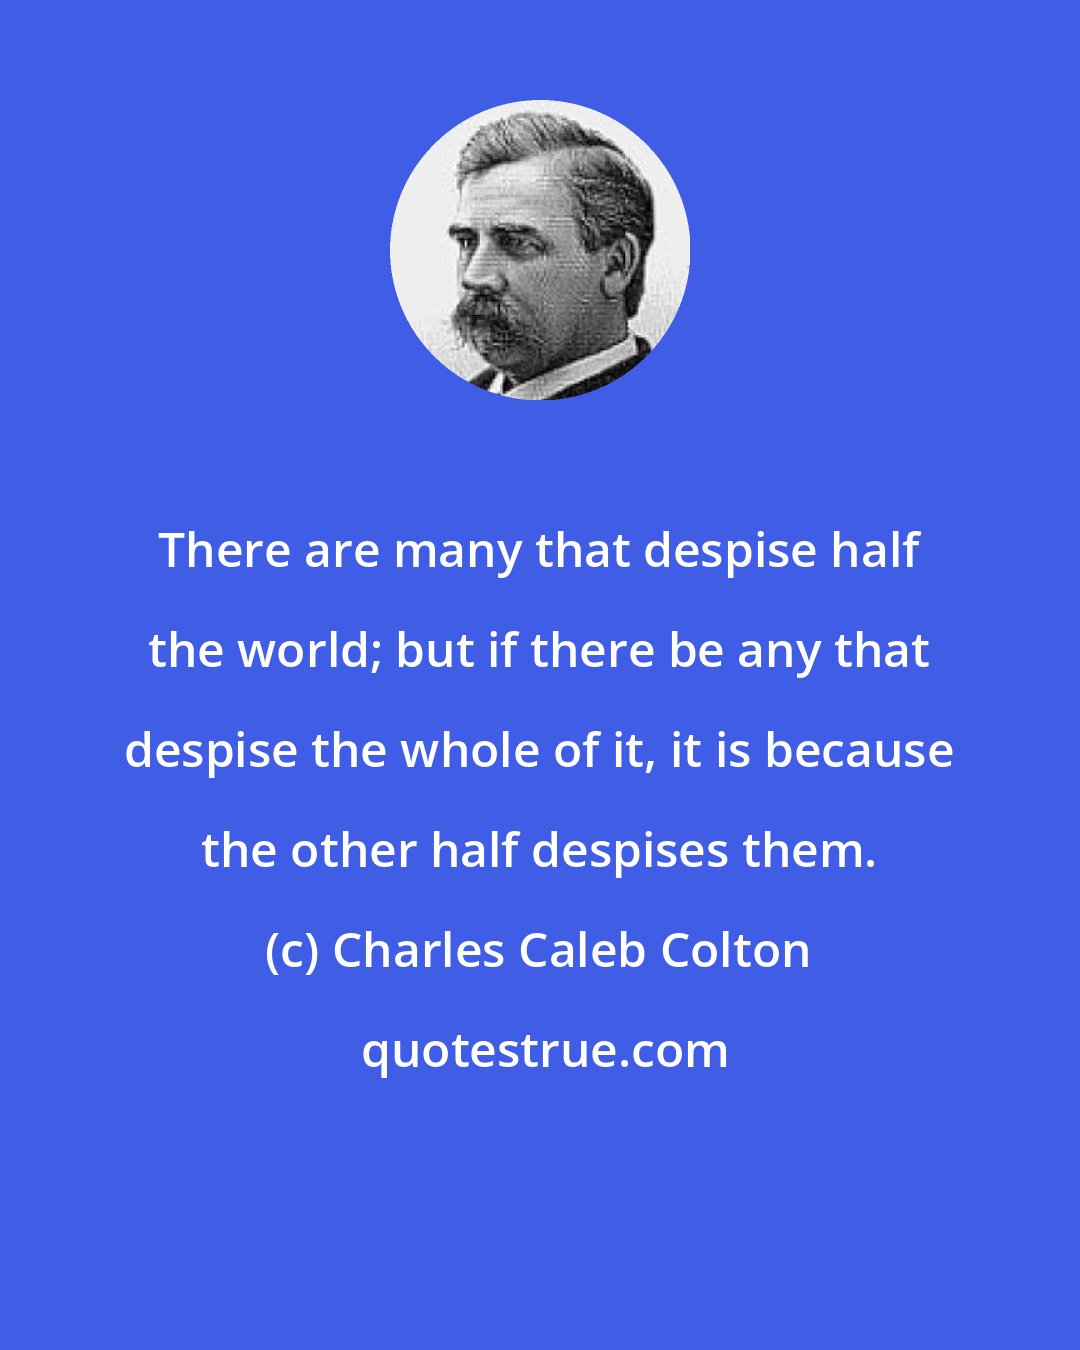 Charles Caleb Colton: There are many that despise half the world; but if there be any that despise the whole of it, it is because the other half despises them.